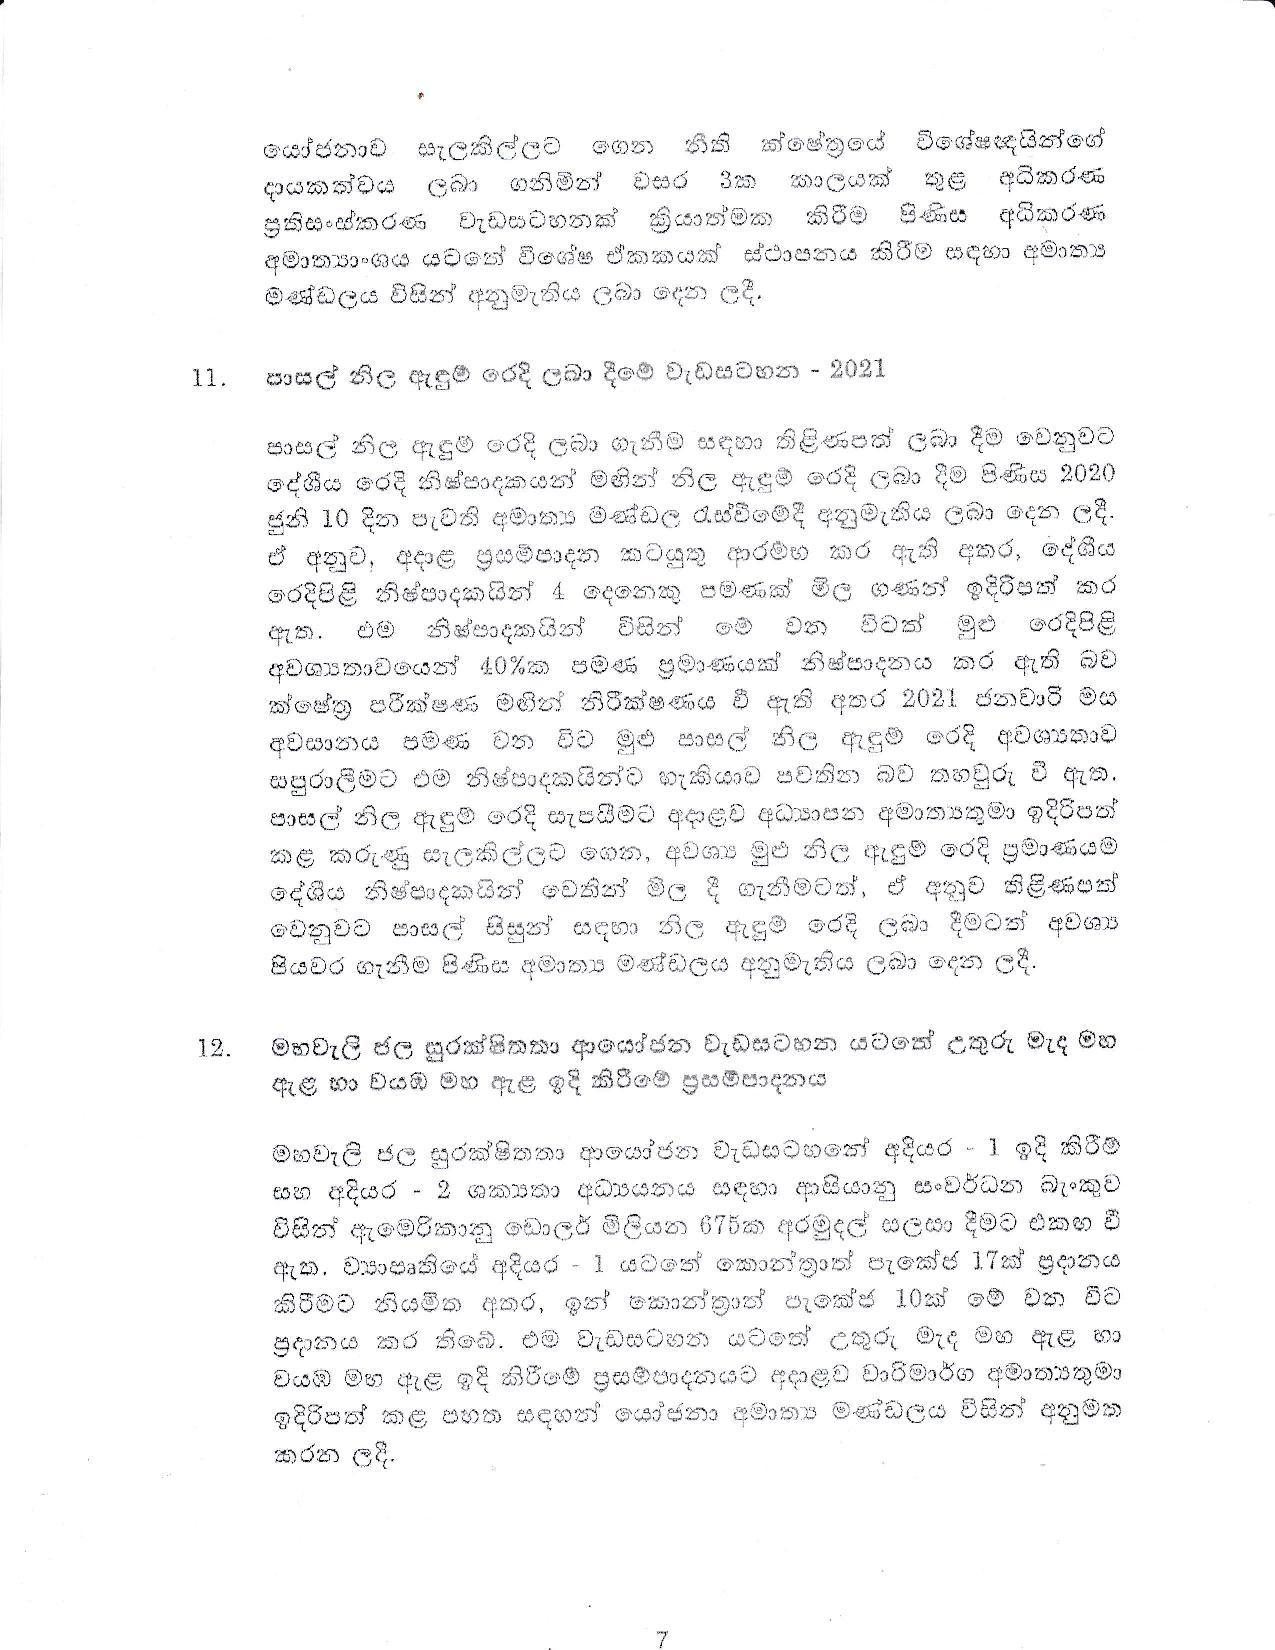 Cabinet Decision on 28.09.2020 page 007